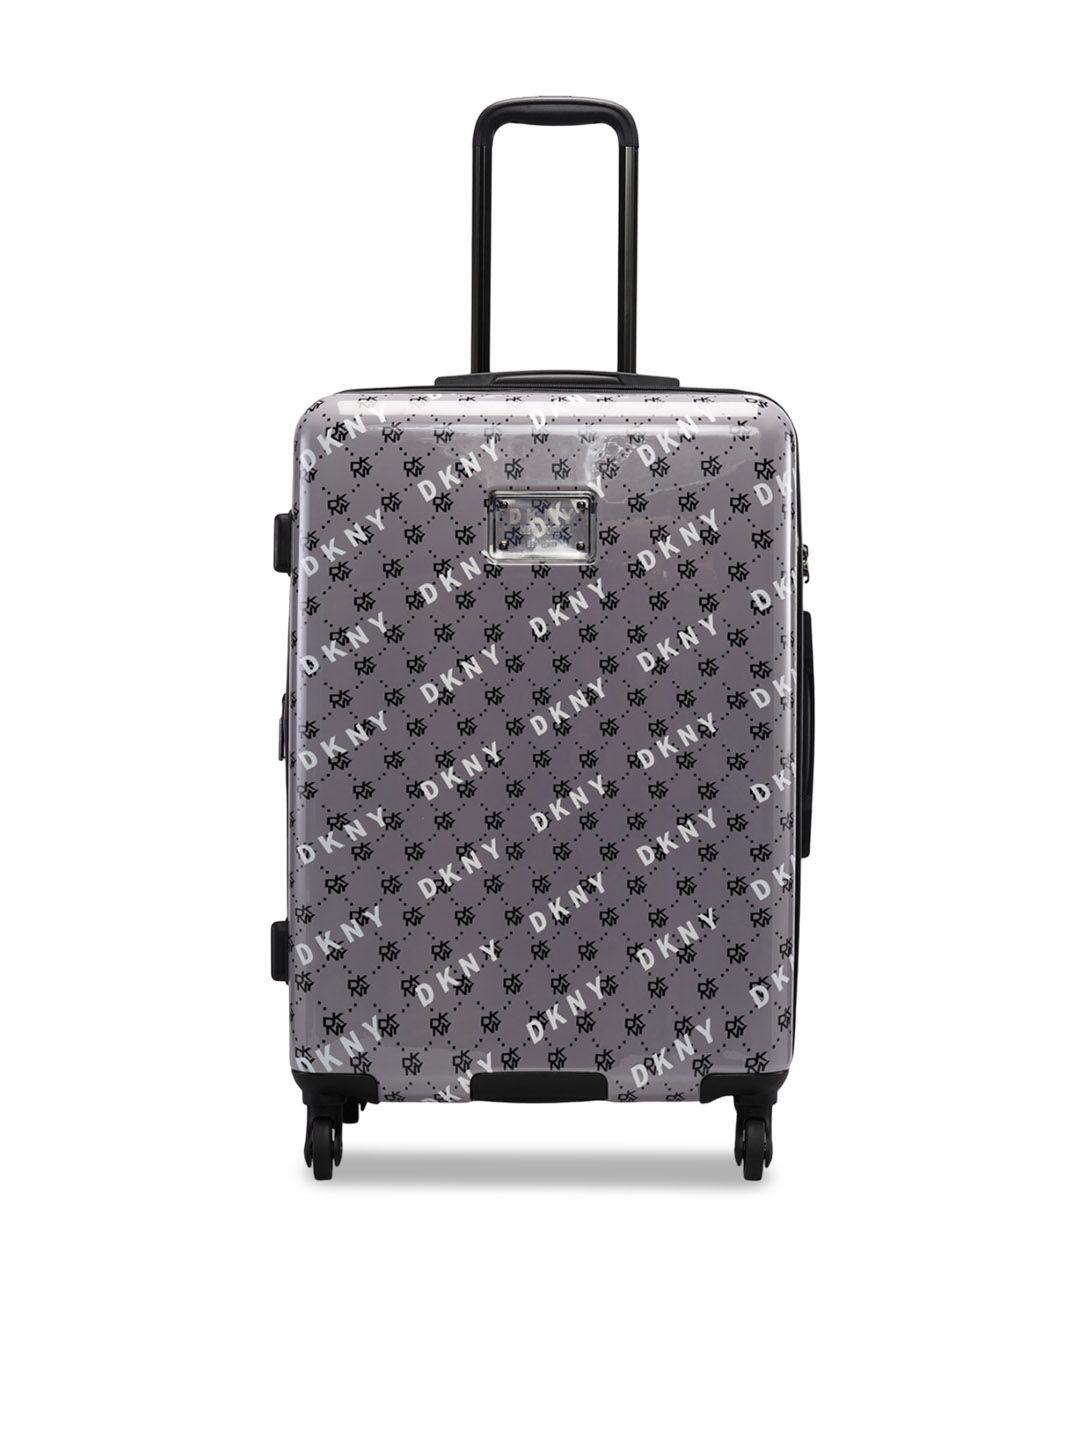 dkny on repeat printed abs material hard-sided medium trolley suitcase